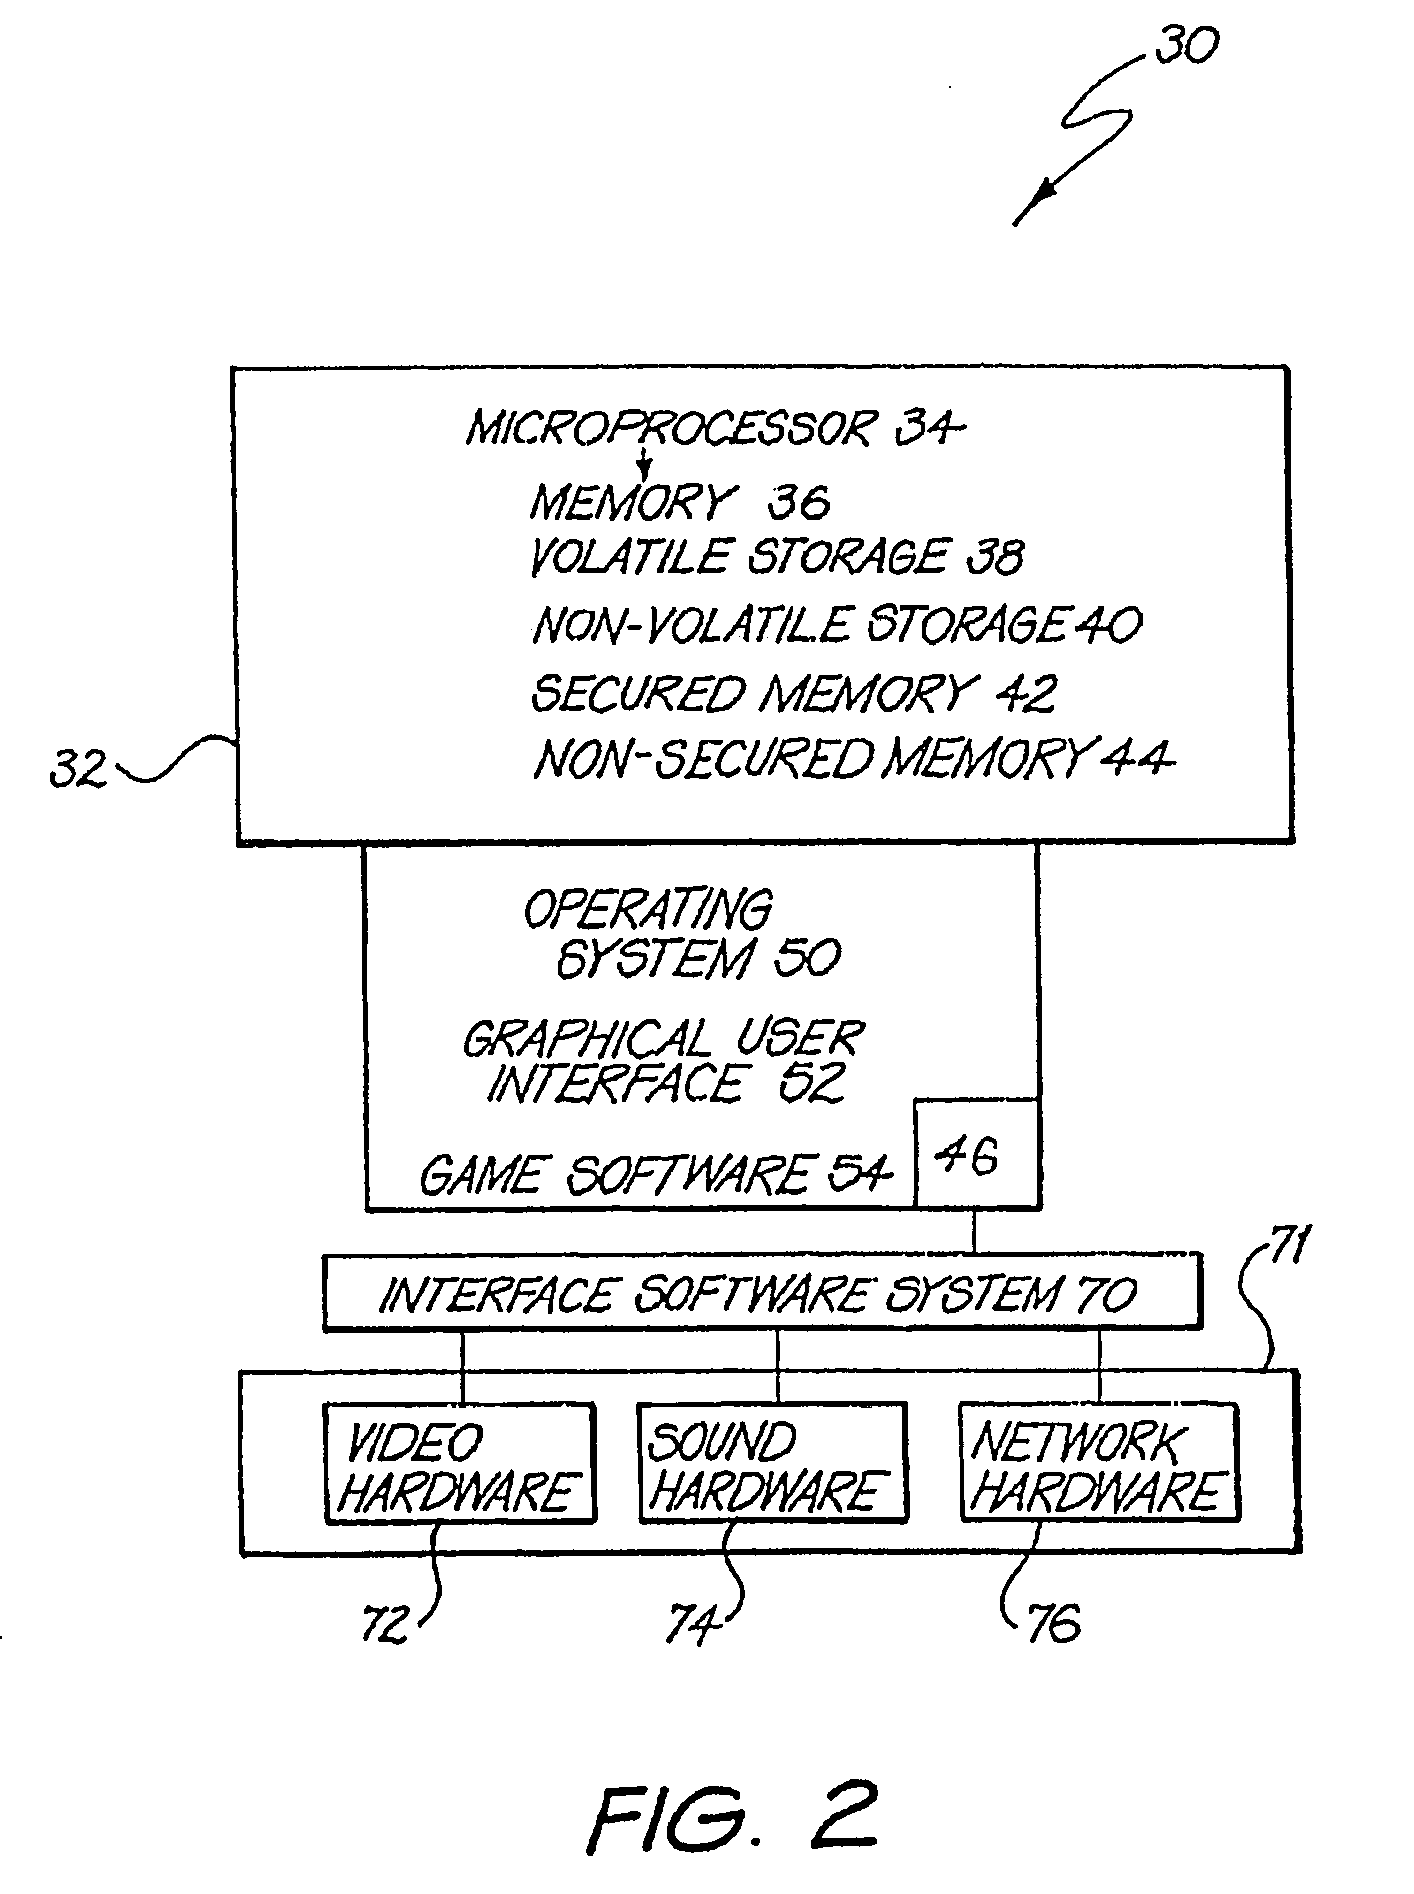 Input/output interface and device abstraction